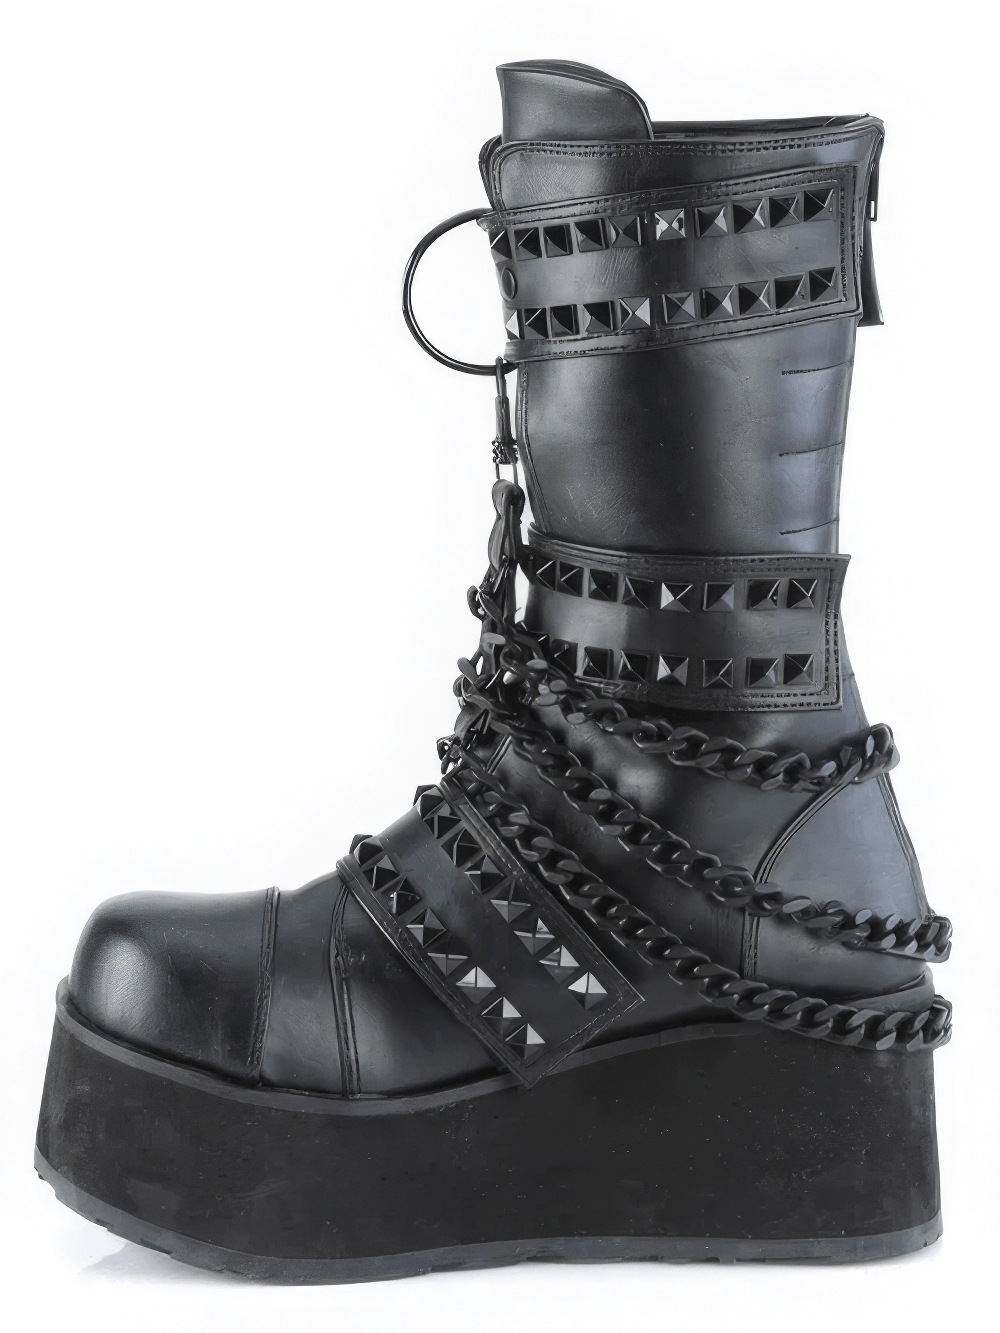 DEMONIA Studded Mid-Calf Boots with Cascading Chain Details